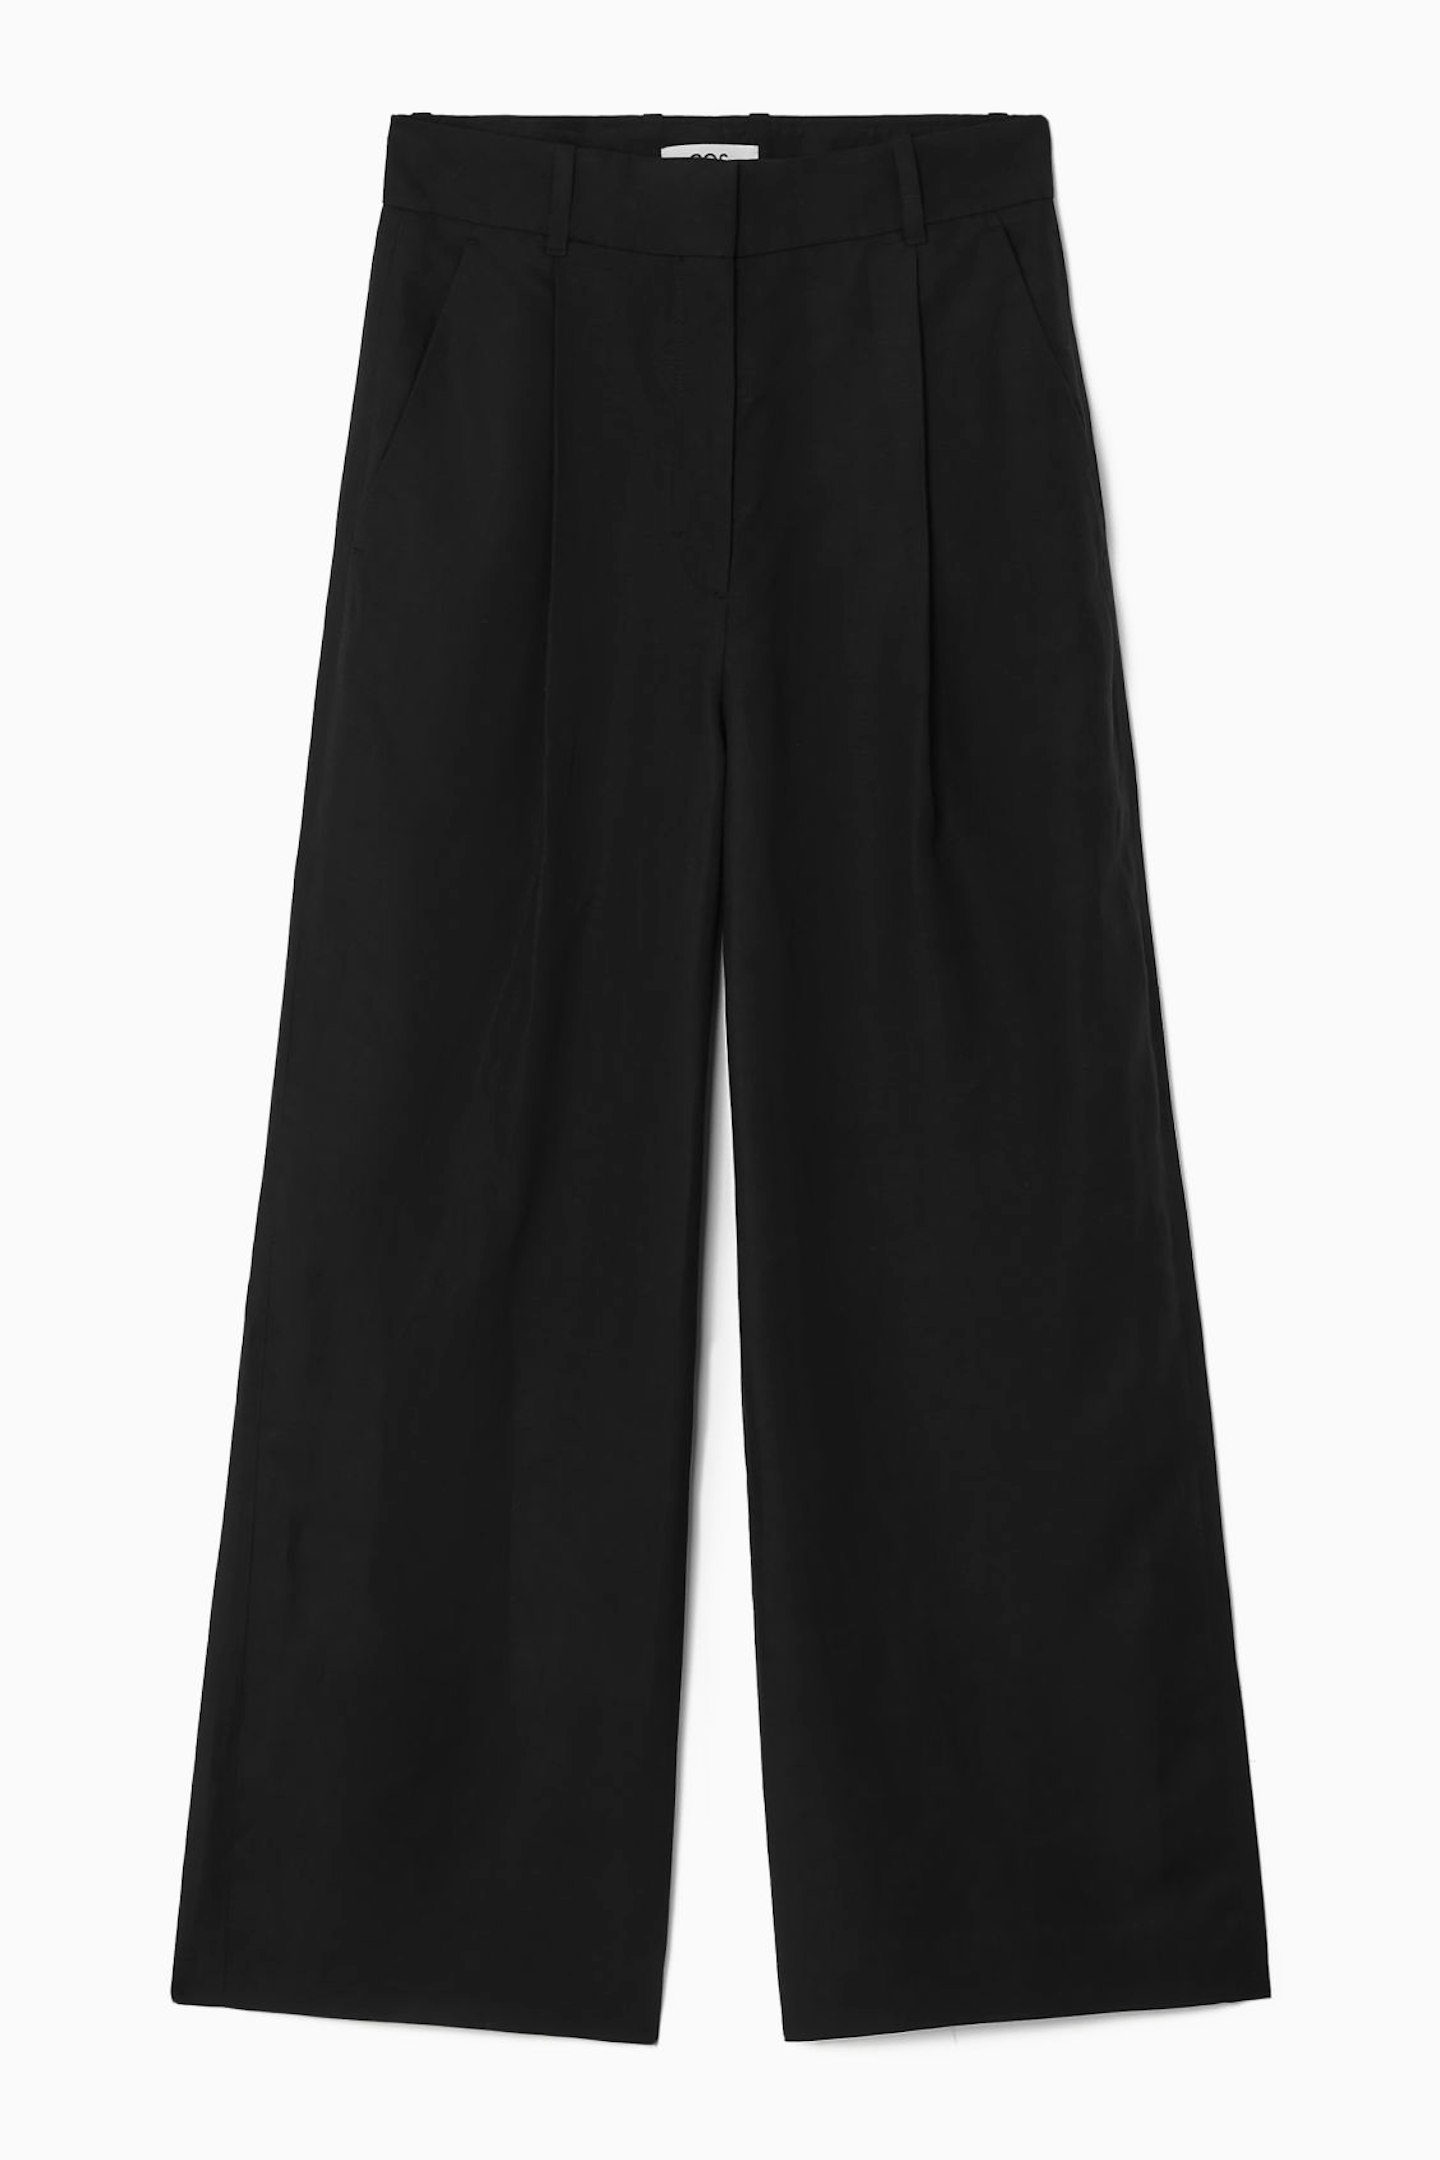 COS, Tailored Trouser